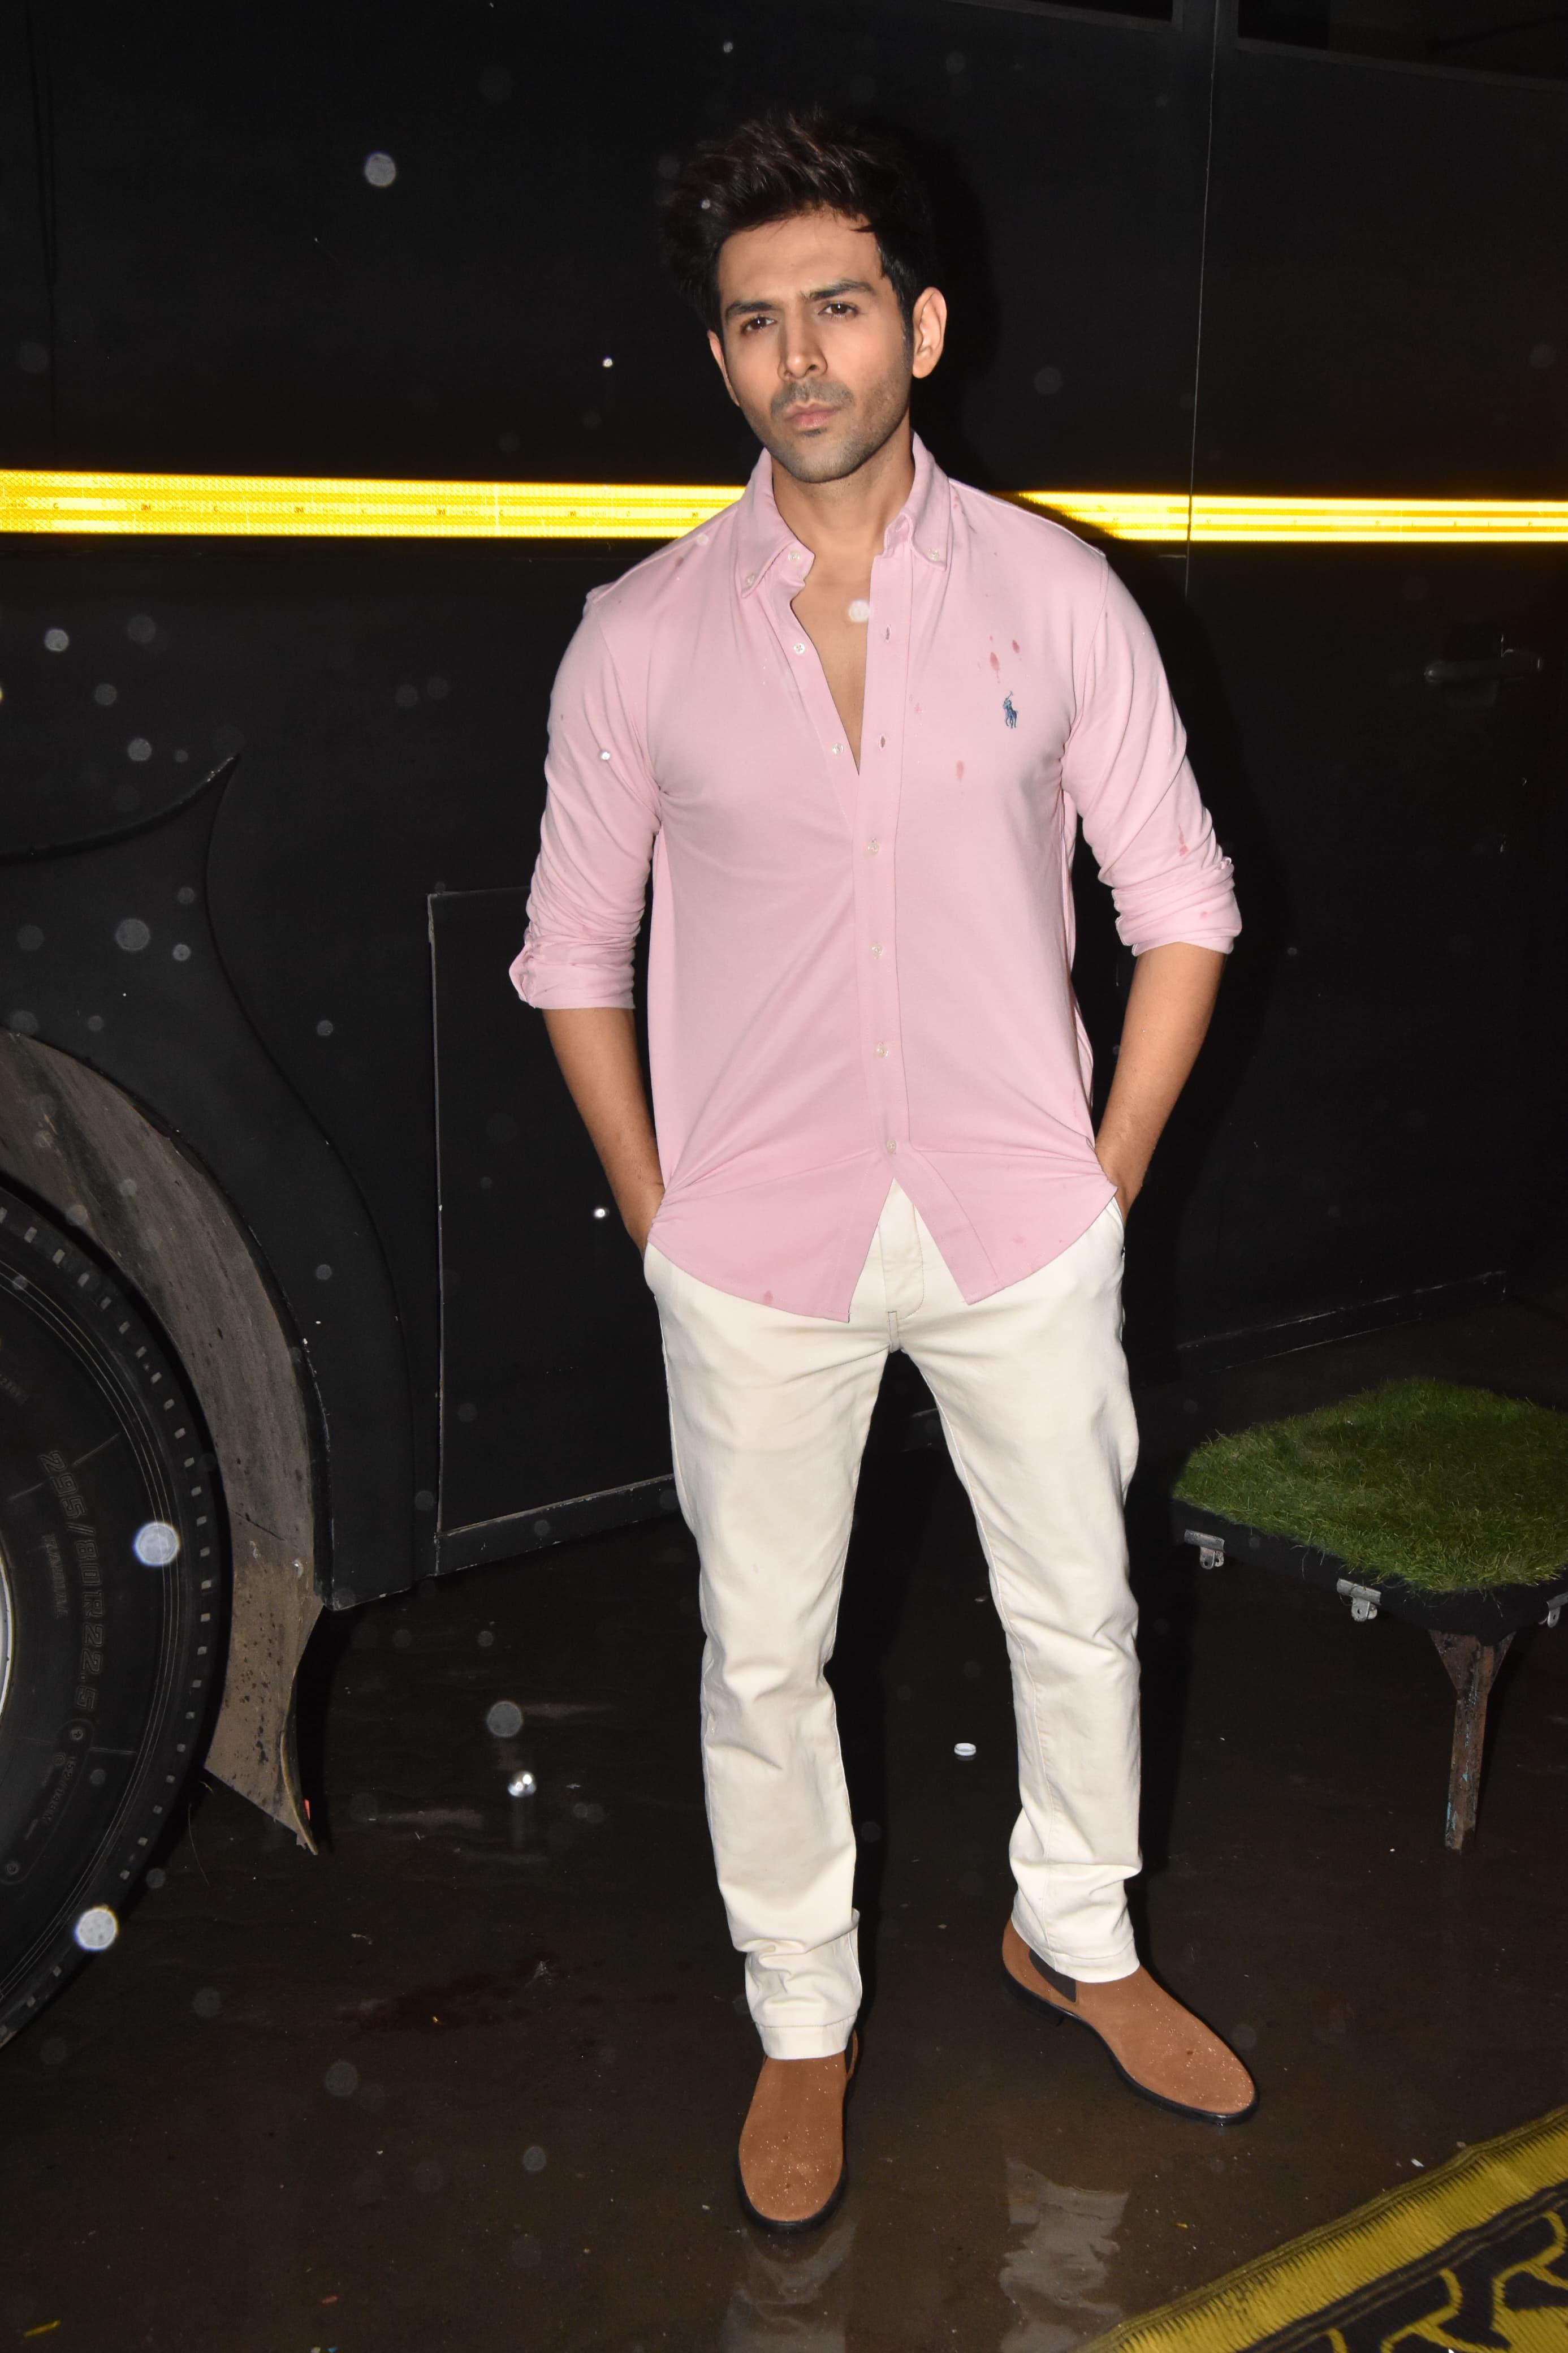 Kartik Aaryan, Bollywood heartthrob was spotted on set today